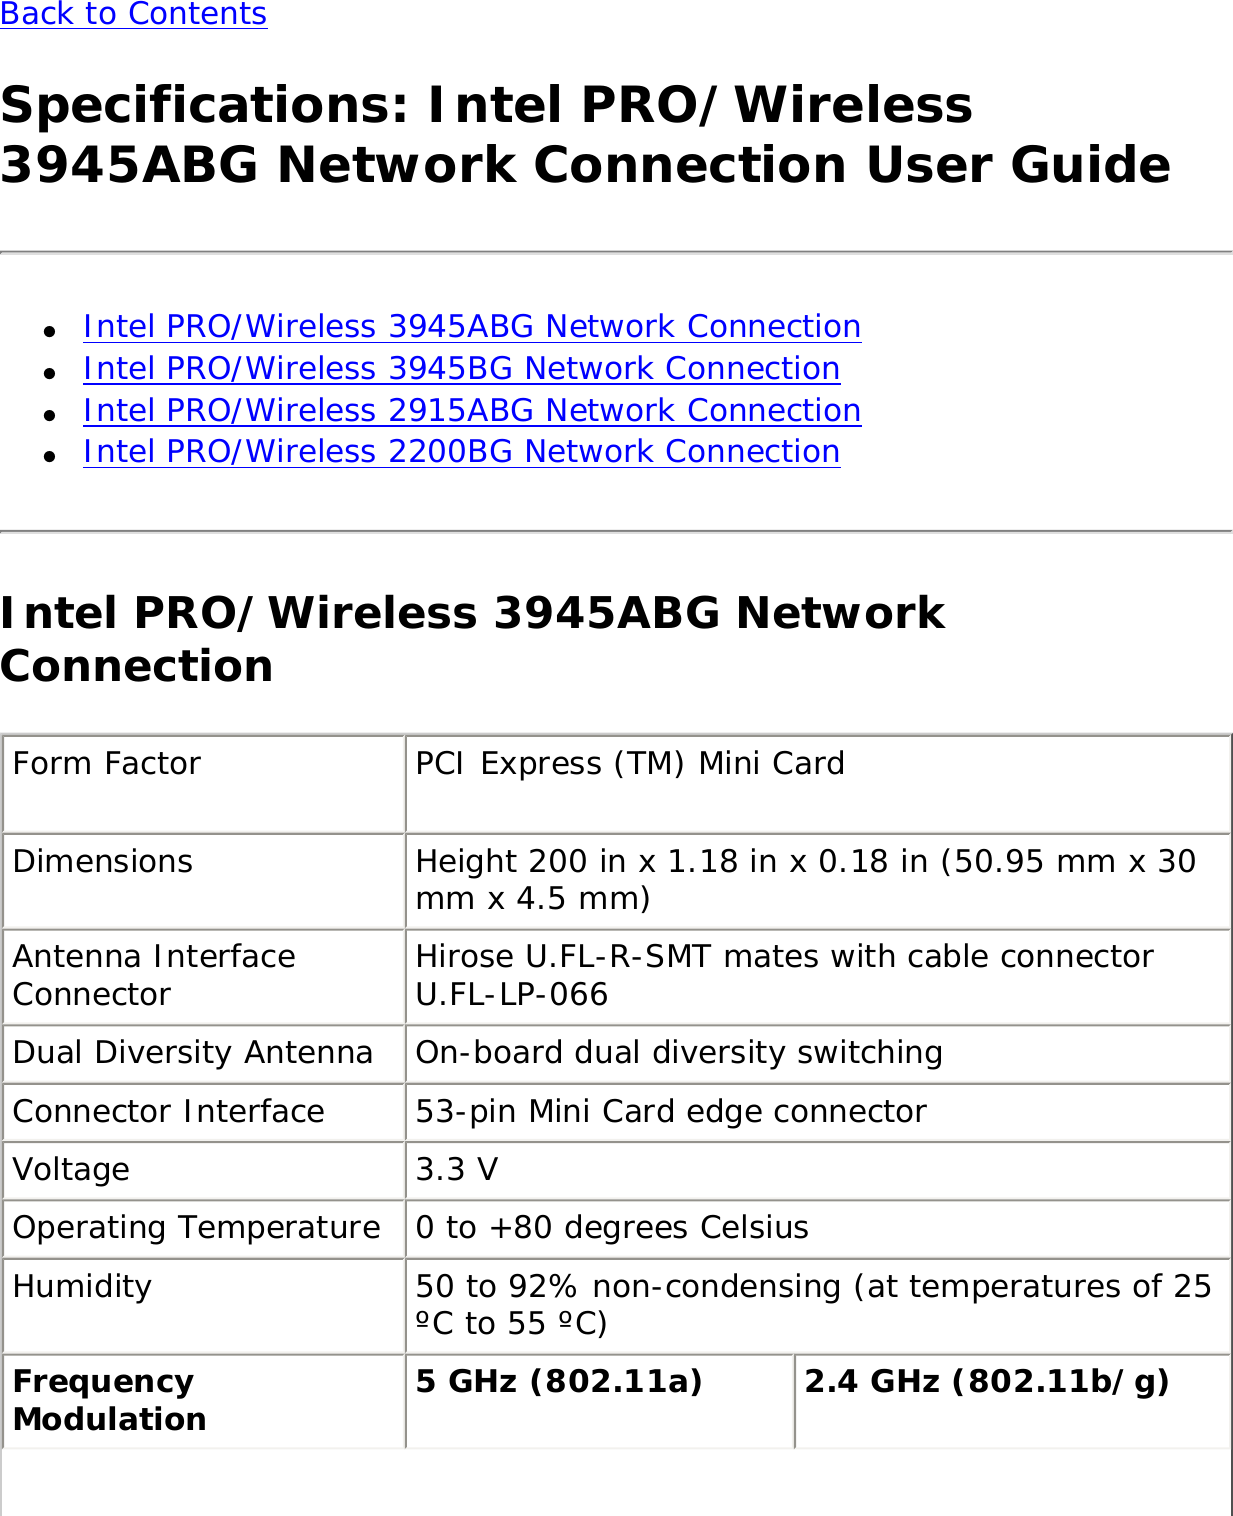 Back to Contents Specifications: Intel PRO/Wireless 3945ABG Network Connection User Guide●     Intel PRO/Wireless 3945ABG Network Connection●     Intel PRO/Wireless 3945BG Network Connection●     Intel PRO/Wireless 2915ABG Network Connection●     Intel PRO/Wireless 2200BG Network ConnectionIntel PRO/Wireless 3945ABG Network ConnectionForm Factor PCI Express (TM) Mini Card Dimensions Height 200 in x 1.18 in x 0.18 in (50.95 mm x 30 mm x 4.5 mm) Antenna Interface Connector Hirose U.FL-R-SMT mates with cable connector U.FL-LP-066 Dual Diversity Antenna On-board dual diversity switching Connector Interface 53-pin Mini Card edge connector Voltage 3.3 V Operating Temperature 0 to +80 degrees Celsius Humidity 50 to 92% non-condensing (at temperatures of 25 ºC to 55 ºC) Frequency Modulation 5 GHz (802.11a) 2.4 GHz (802.11b/g) 